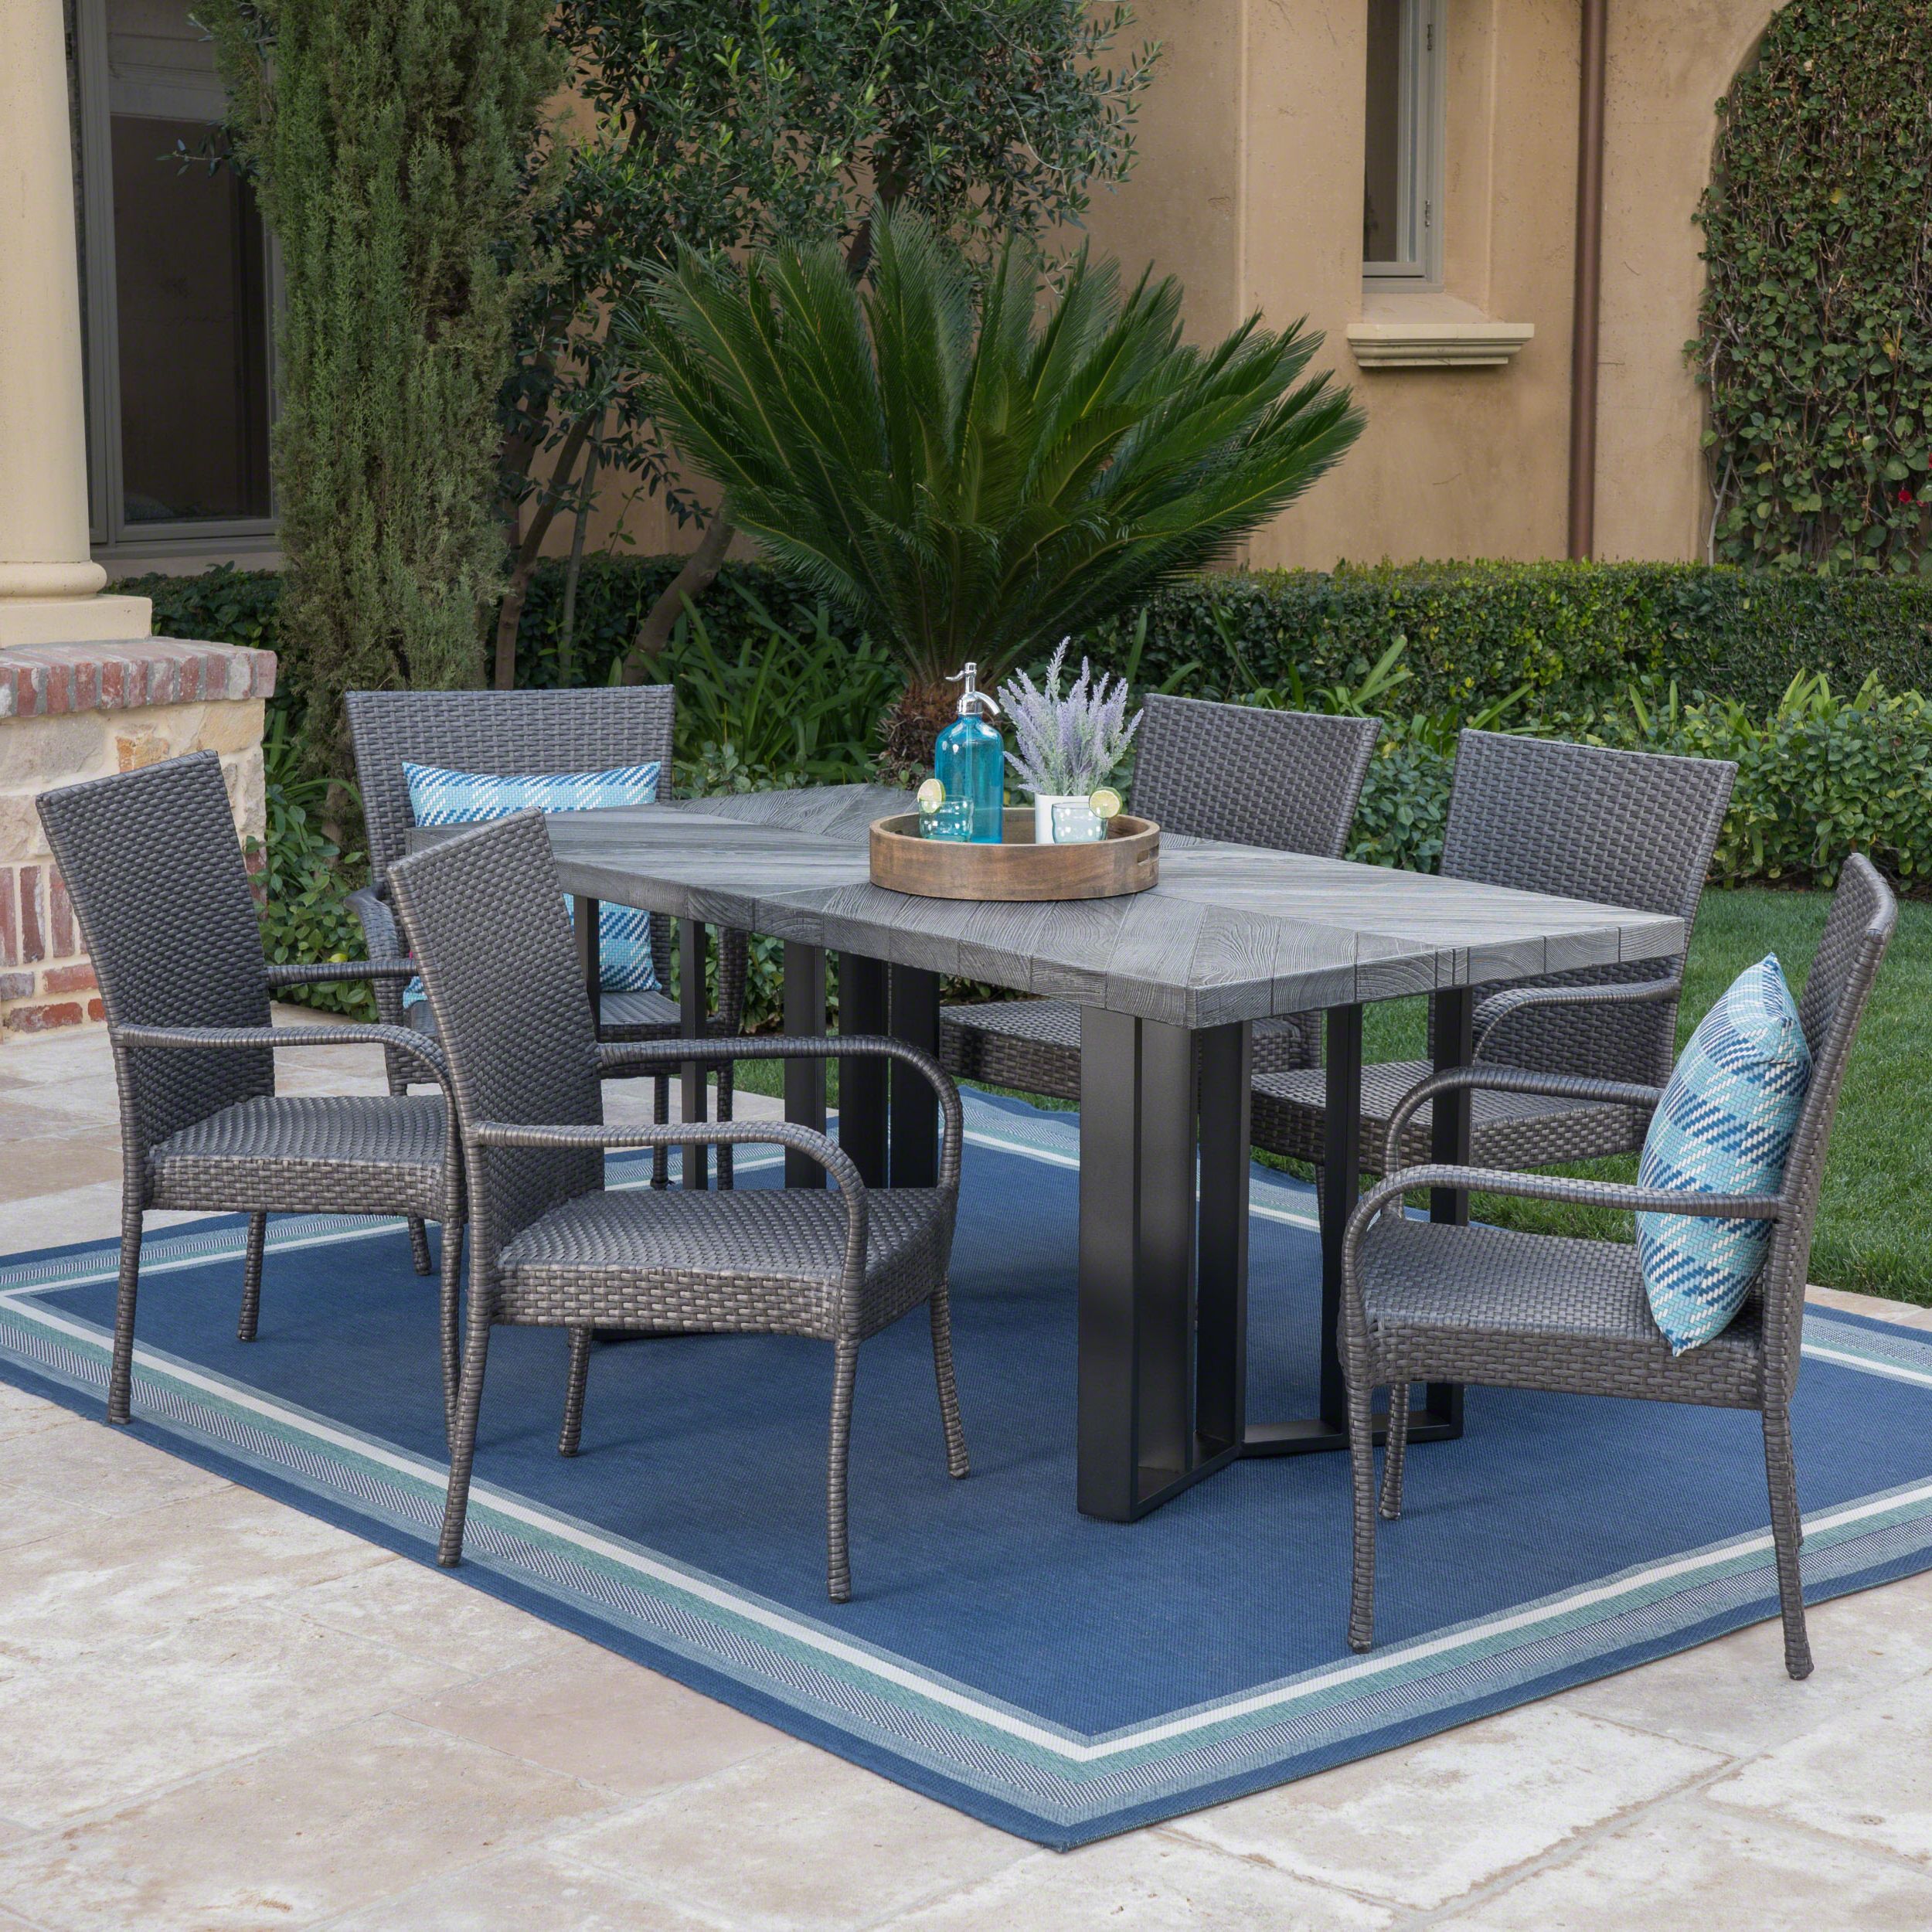 Gray Wicker Rectangular Patio Dining Sets With Regard To Trendy Fabiana Outdoor 7 Piece Wicker Dining Set With Textured Finish Light (View 4 of 15)